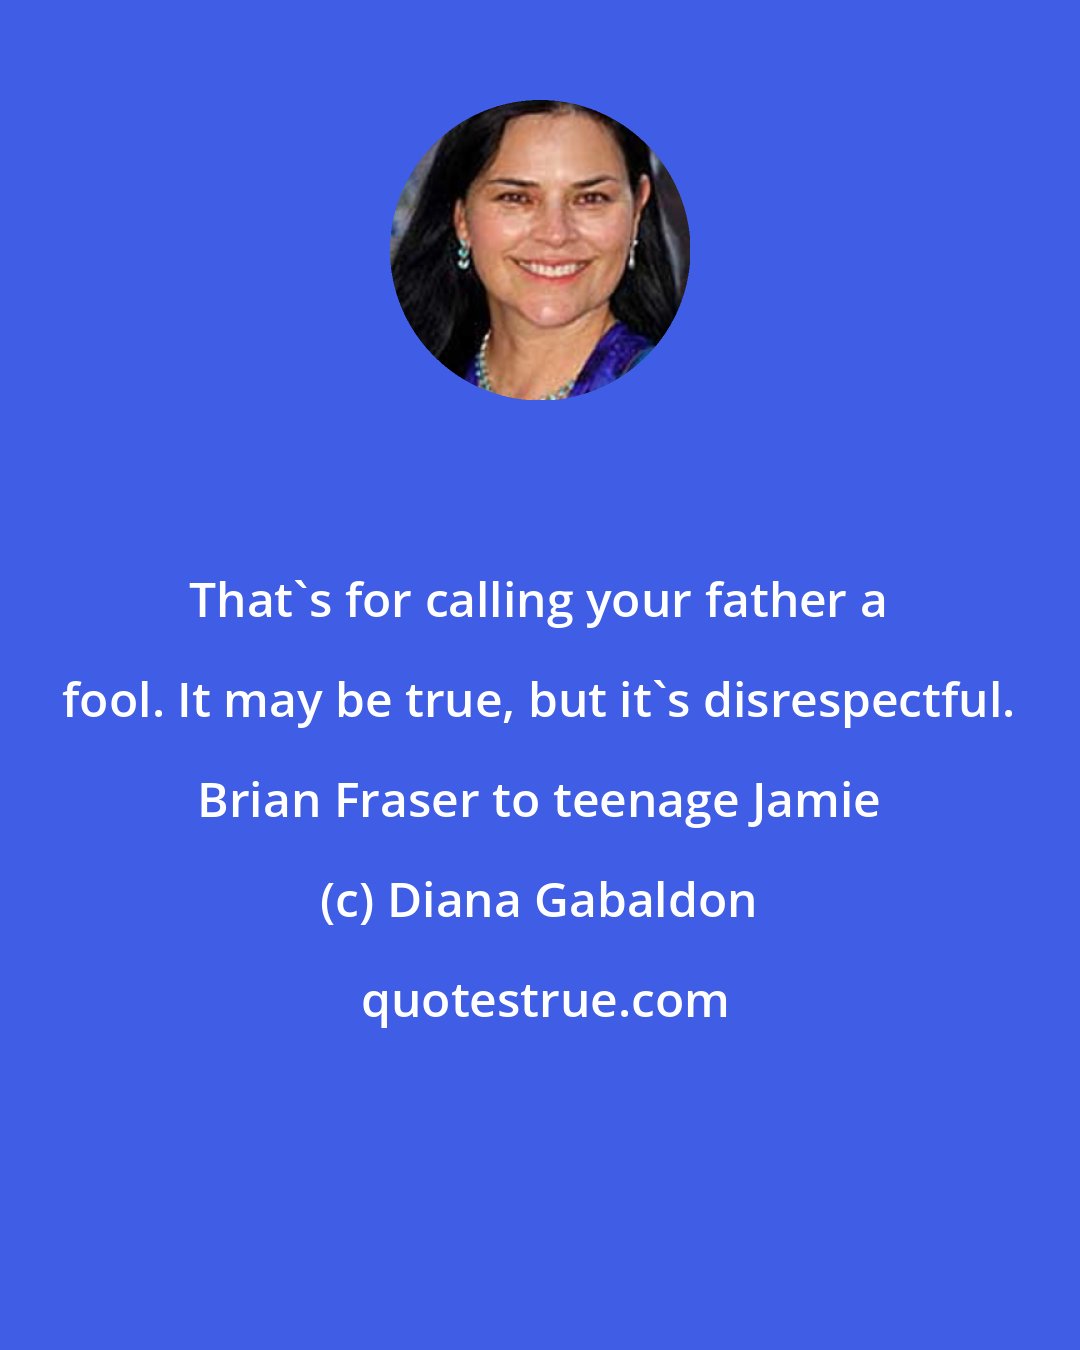 Diana Gabaldon: That's for calling your father a fool. It may be true, but it's disrespectful. Brian Fraser to teenage Jamie